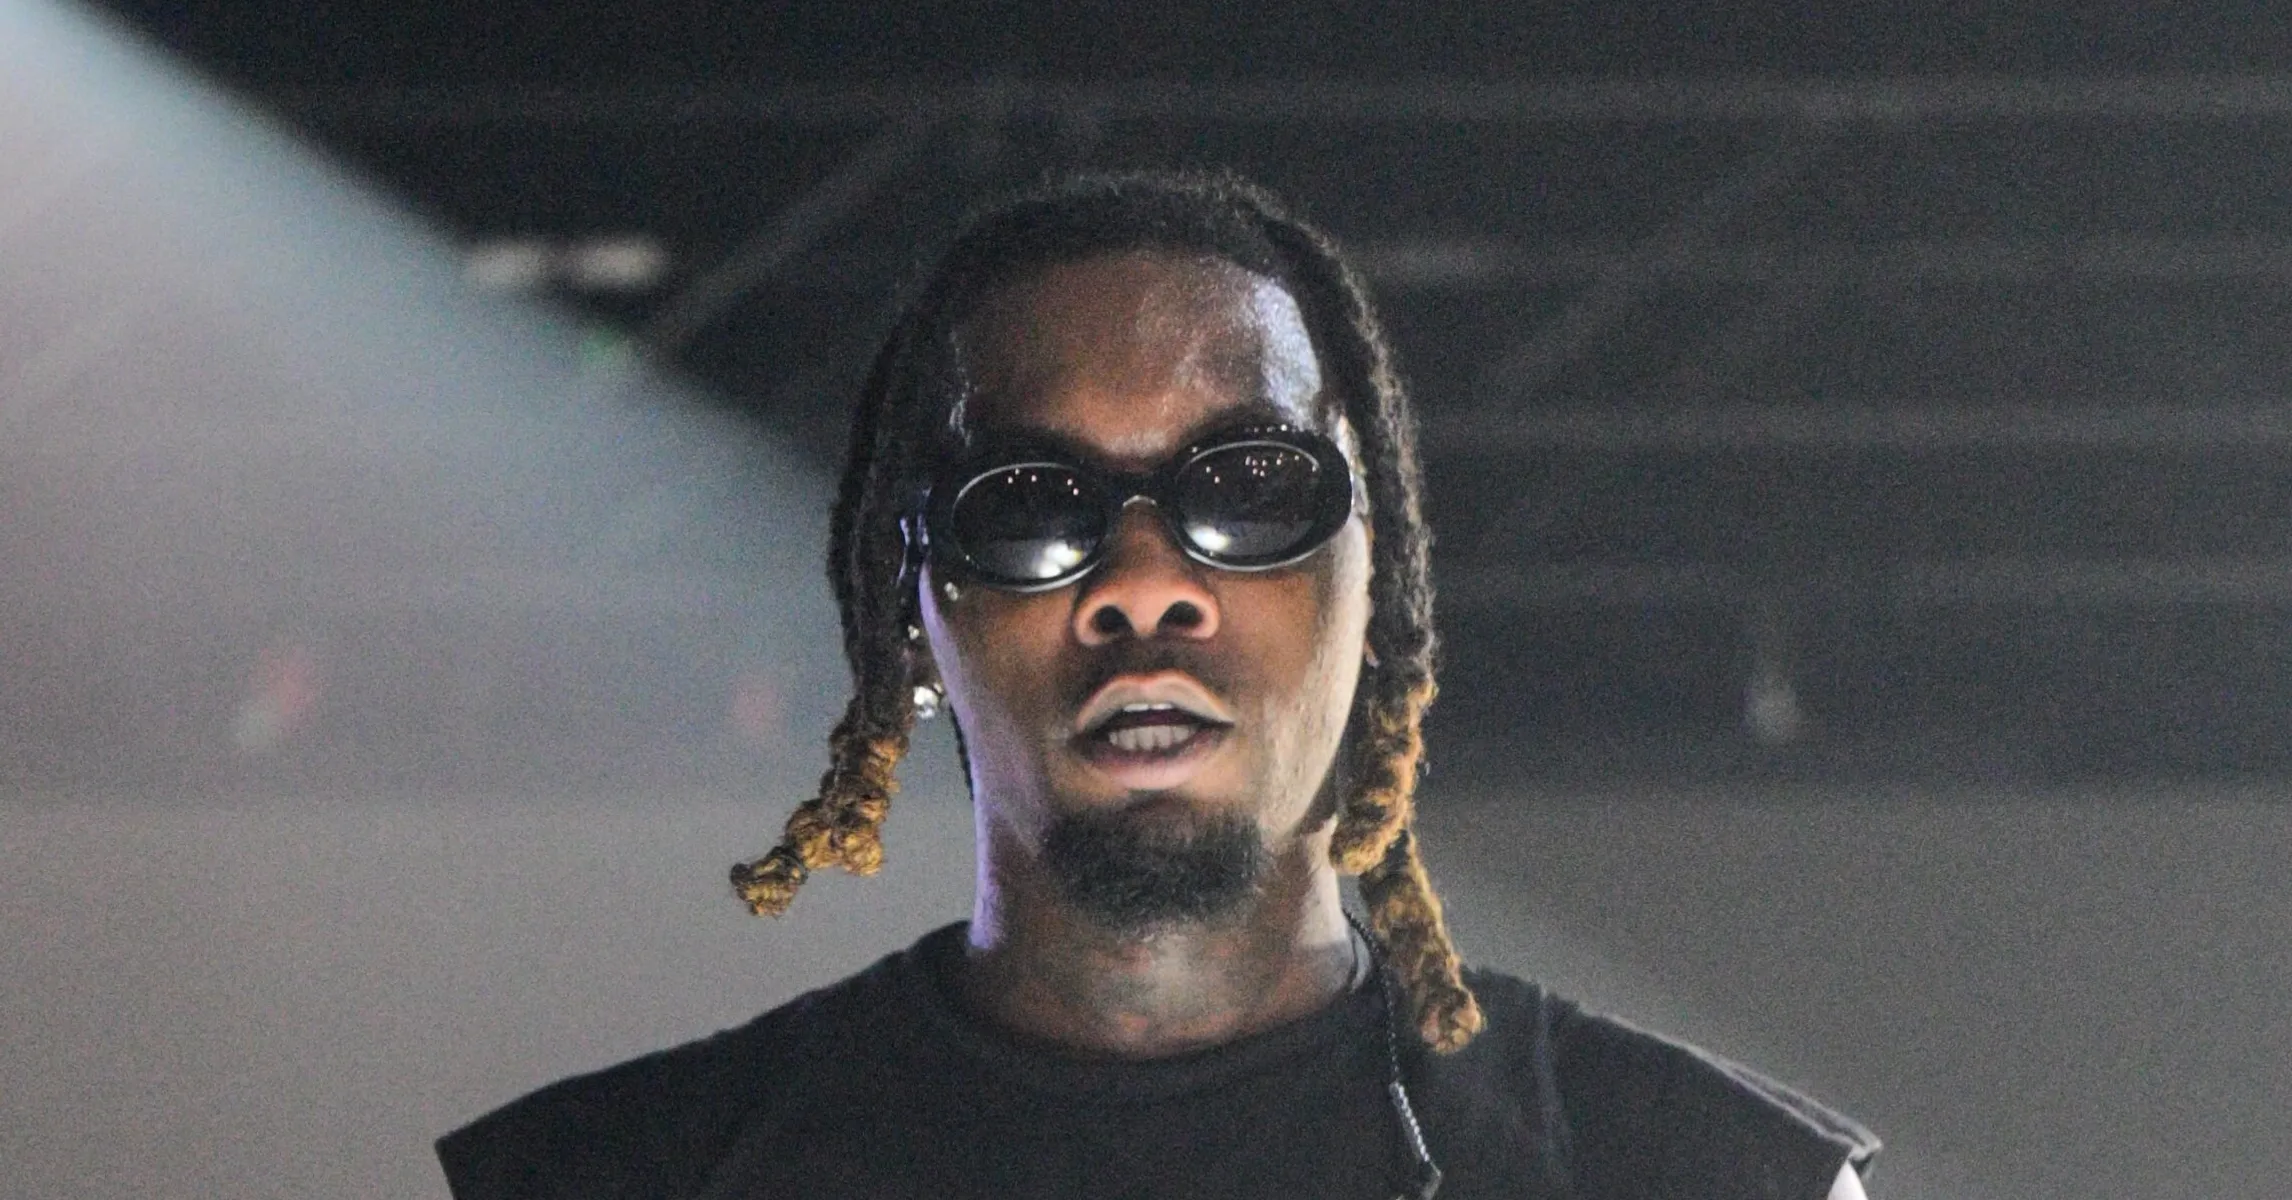 Offset Accused Of “Disrespecting” Cardi B On IG Amid Pregnancy Rumors